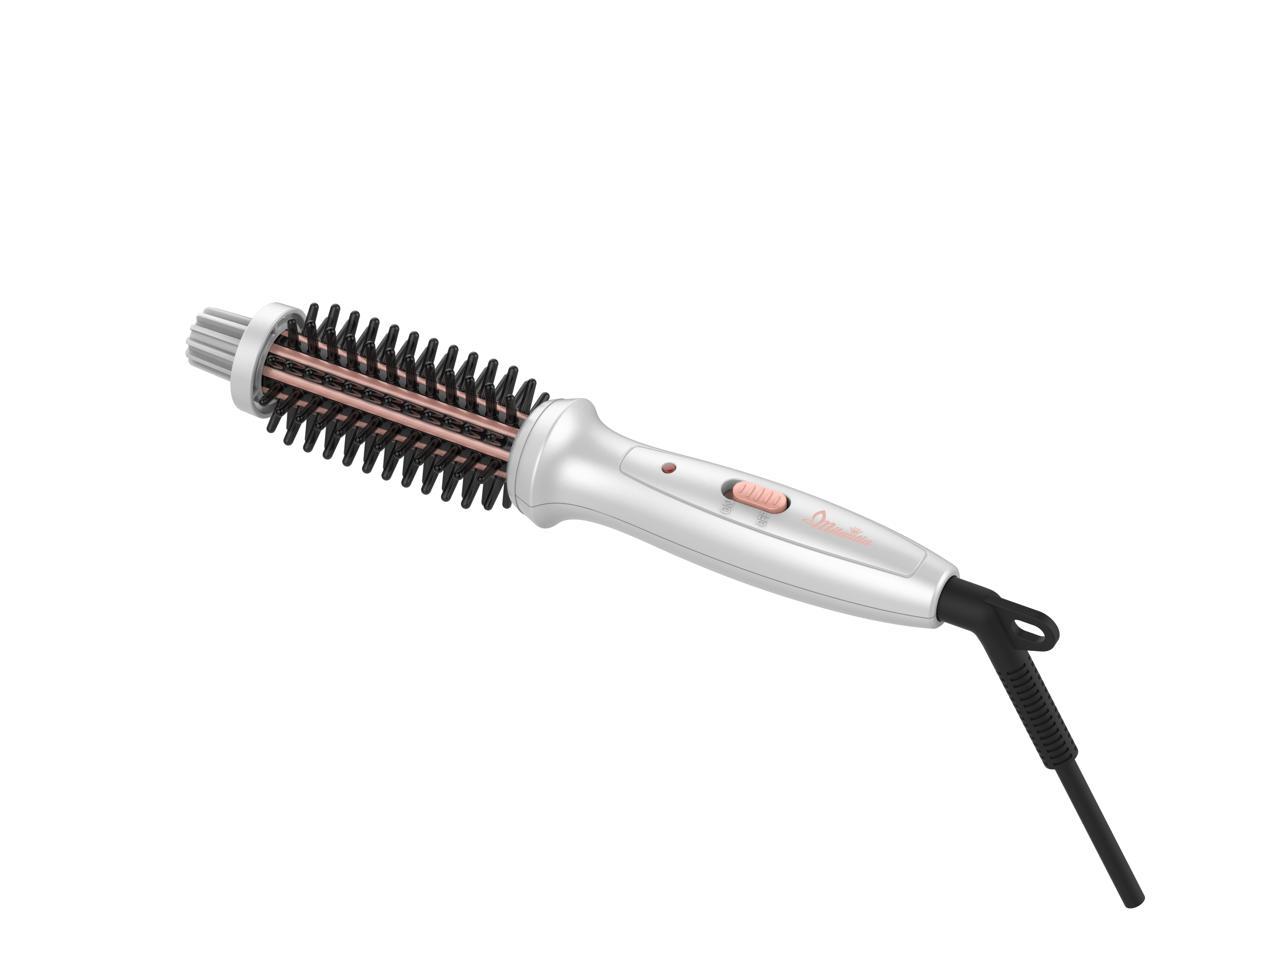 S R Mini Curling Iron Brush For Short Hair Dual Voltage 3 4in Ceramic Tourmaline Ionic Electric Hair Curler Brush Portable Heated Styling Brush Iron For Fine Hair With Traveling Bag Eu Adapter Newegg Com